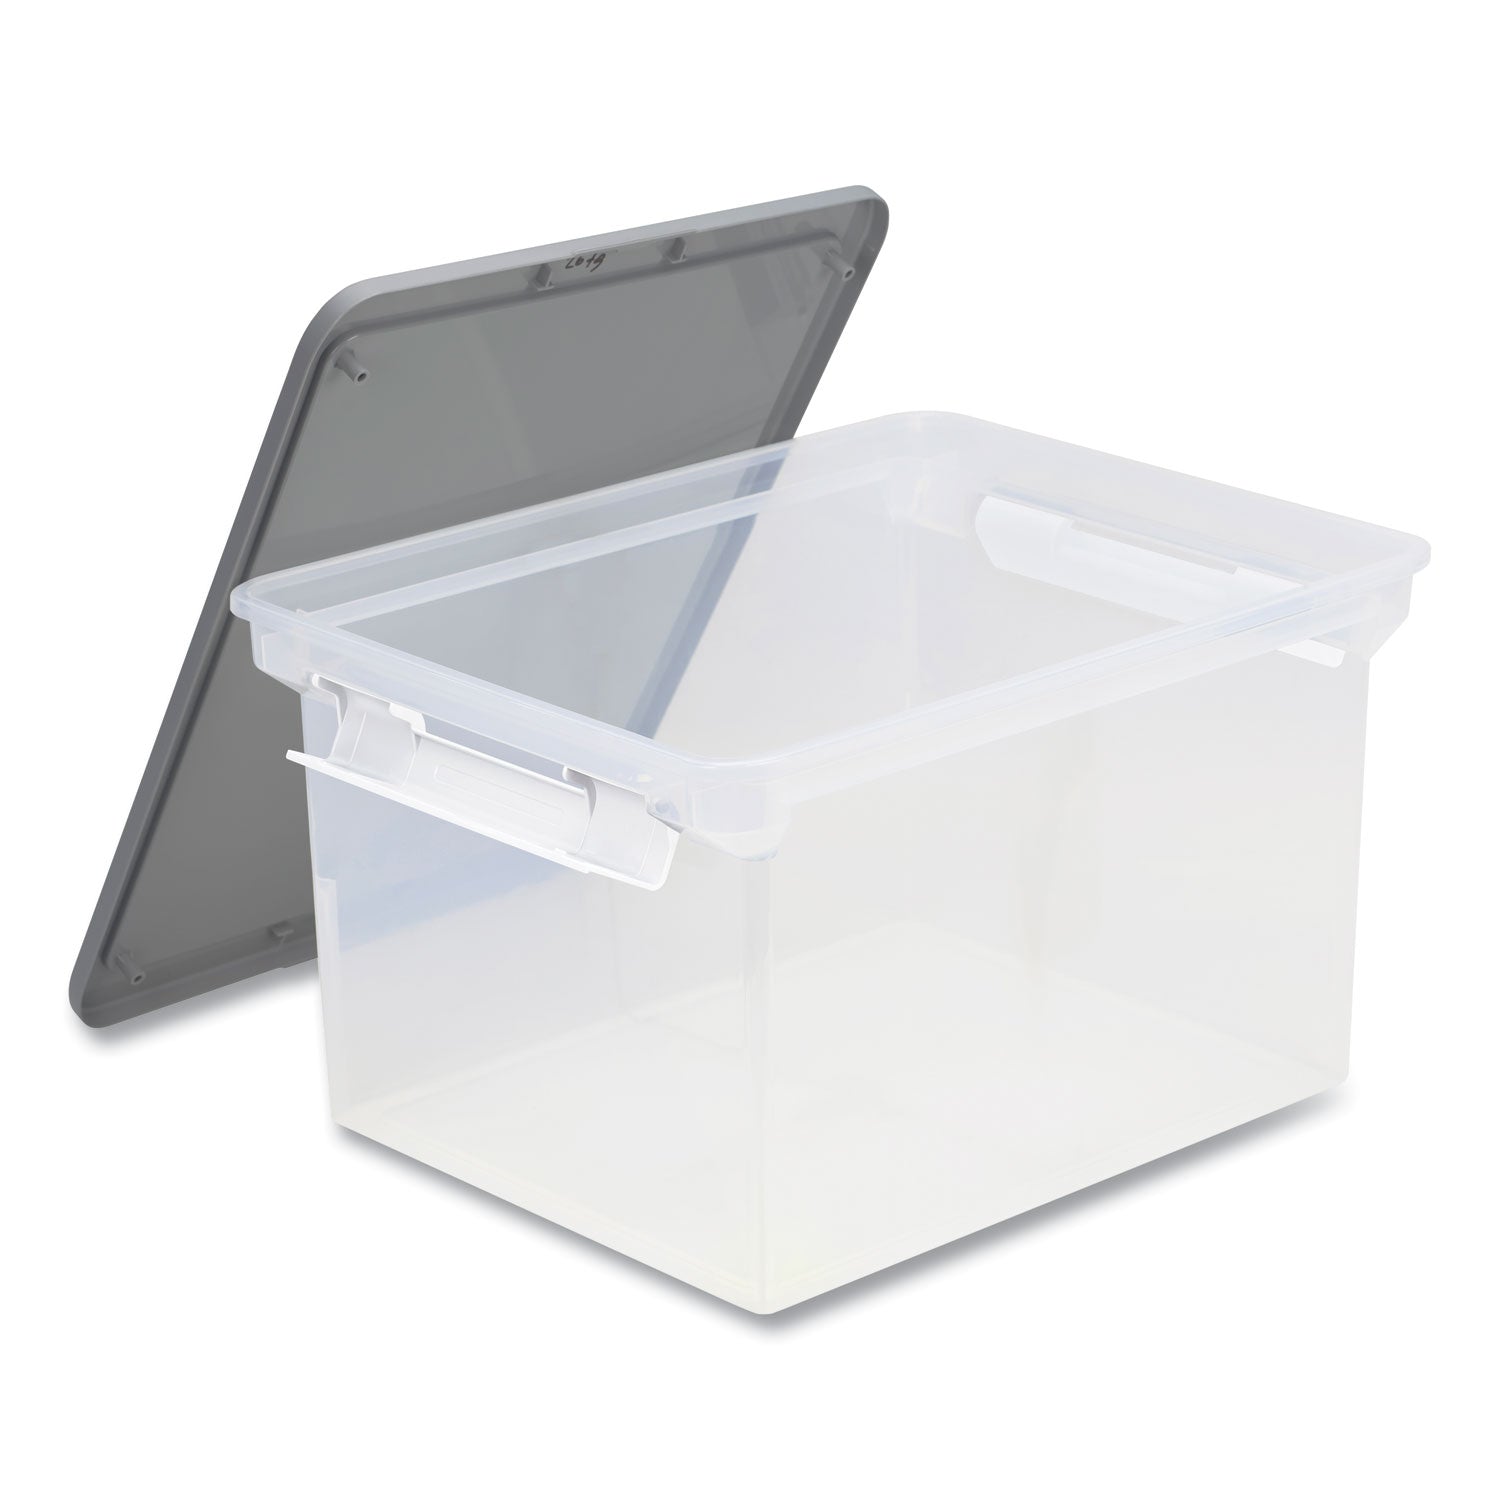 tote-with-locking-handles-legal-letter-139-x-183-x-106-clear-silver-4-carton_stx61530u04c - 1